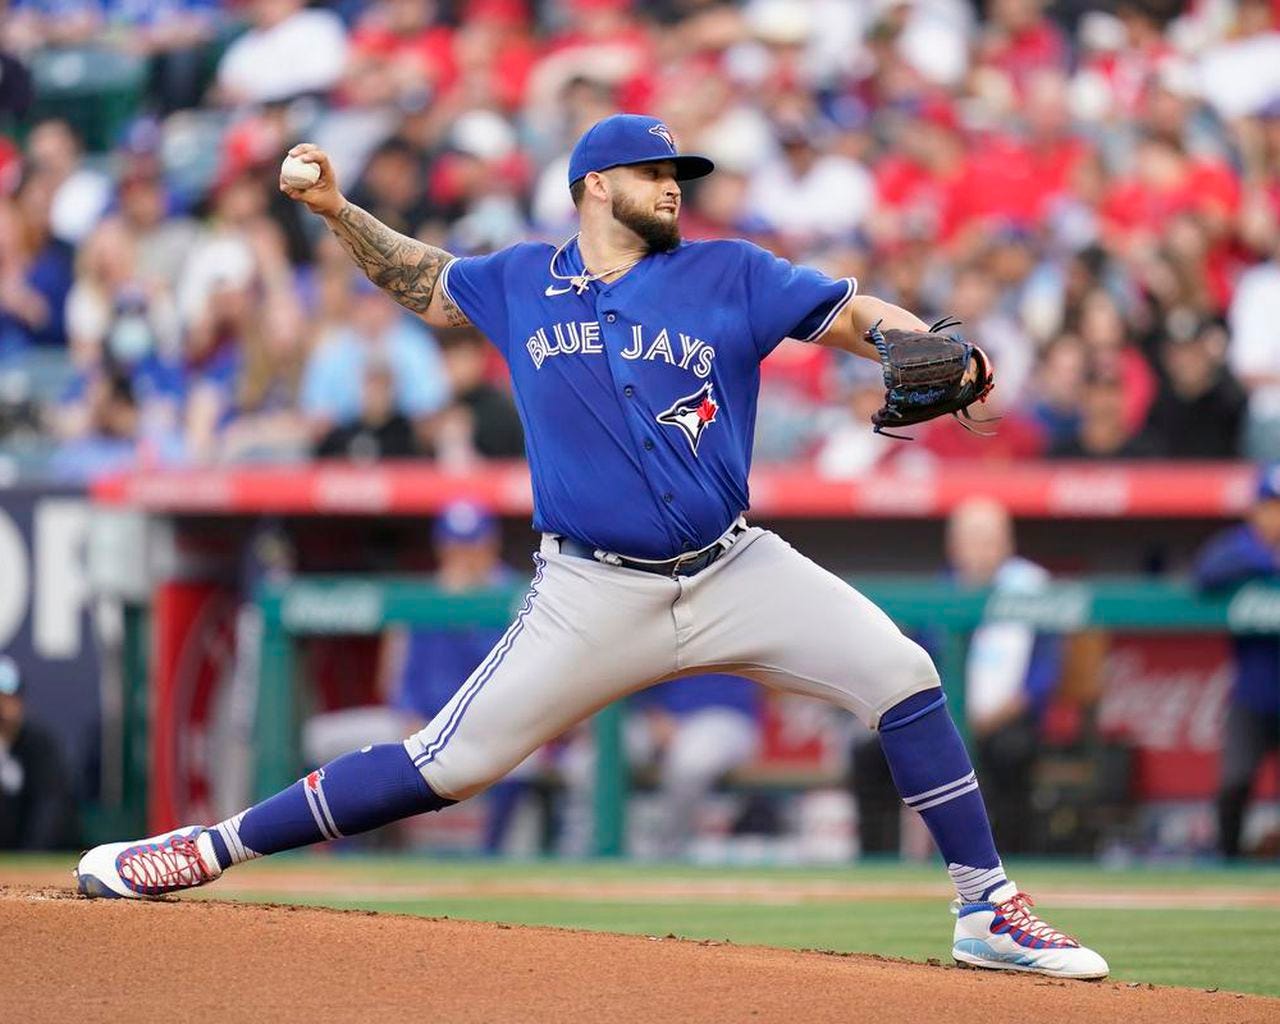 Jays beat Angels again, Manoah covers up a lot of errors | The Star